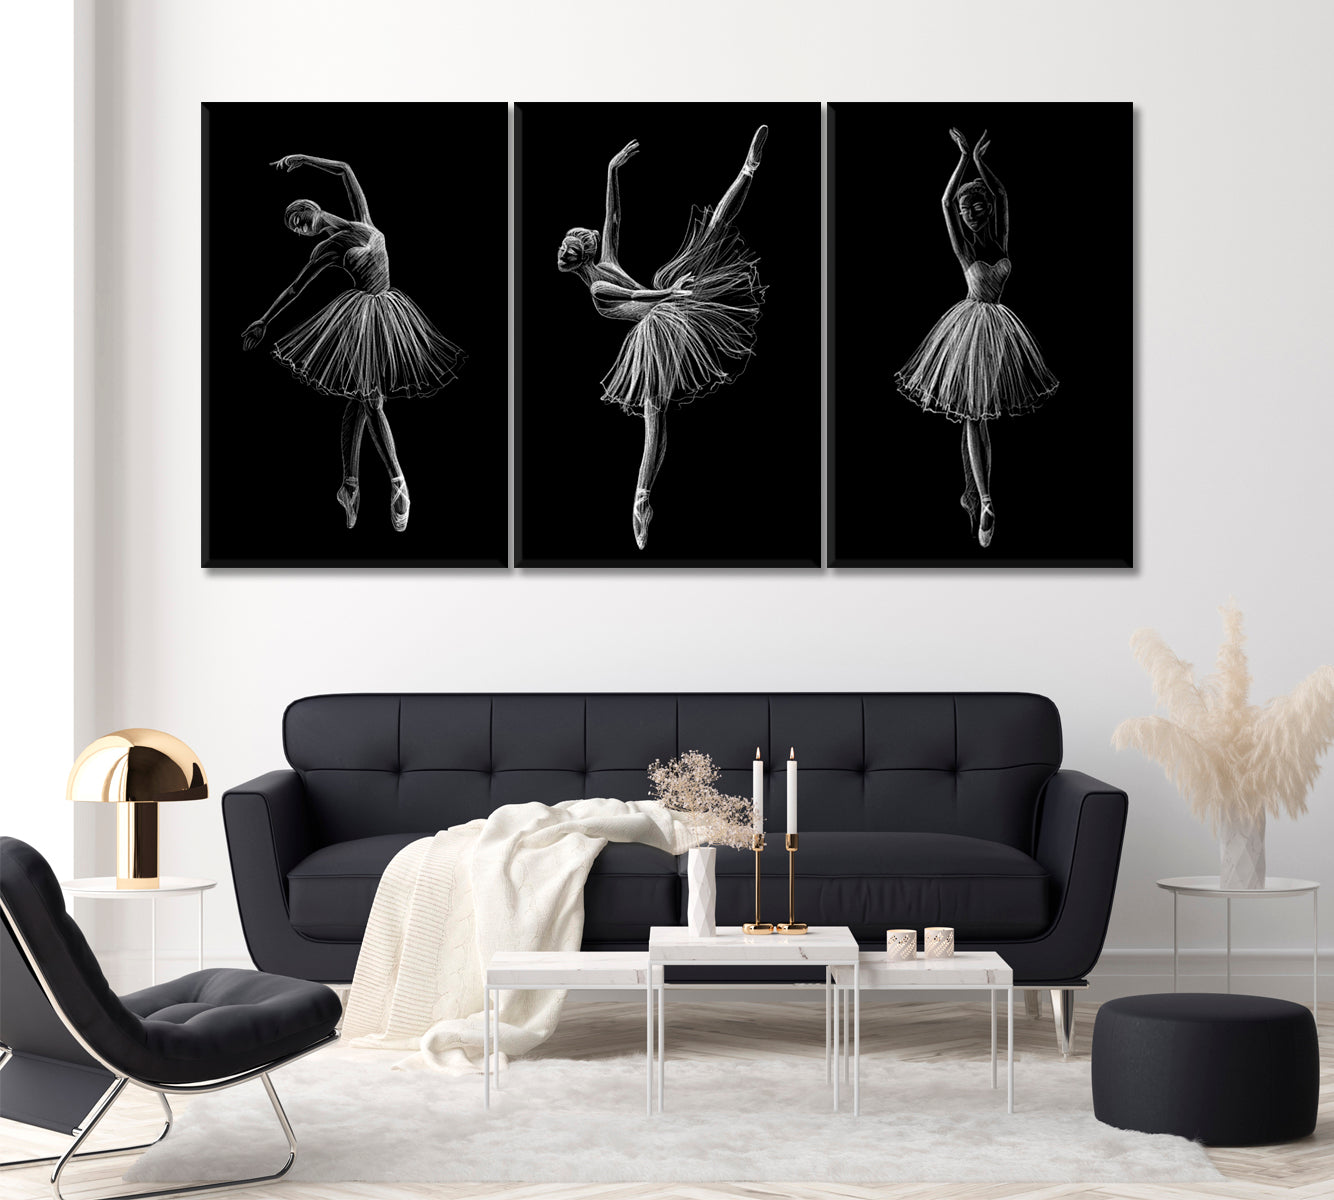 Set of 3 Ballerina in Black and White Canvas Print ArtLexy 3 Panels 48”x24” inches 